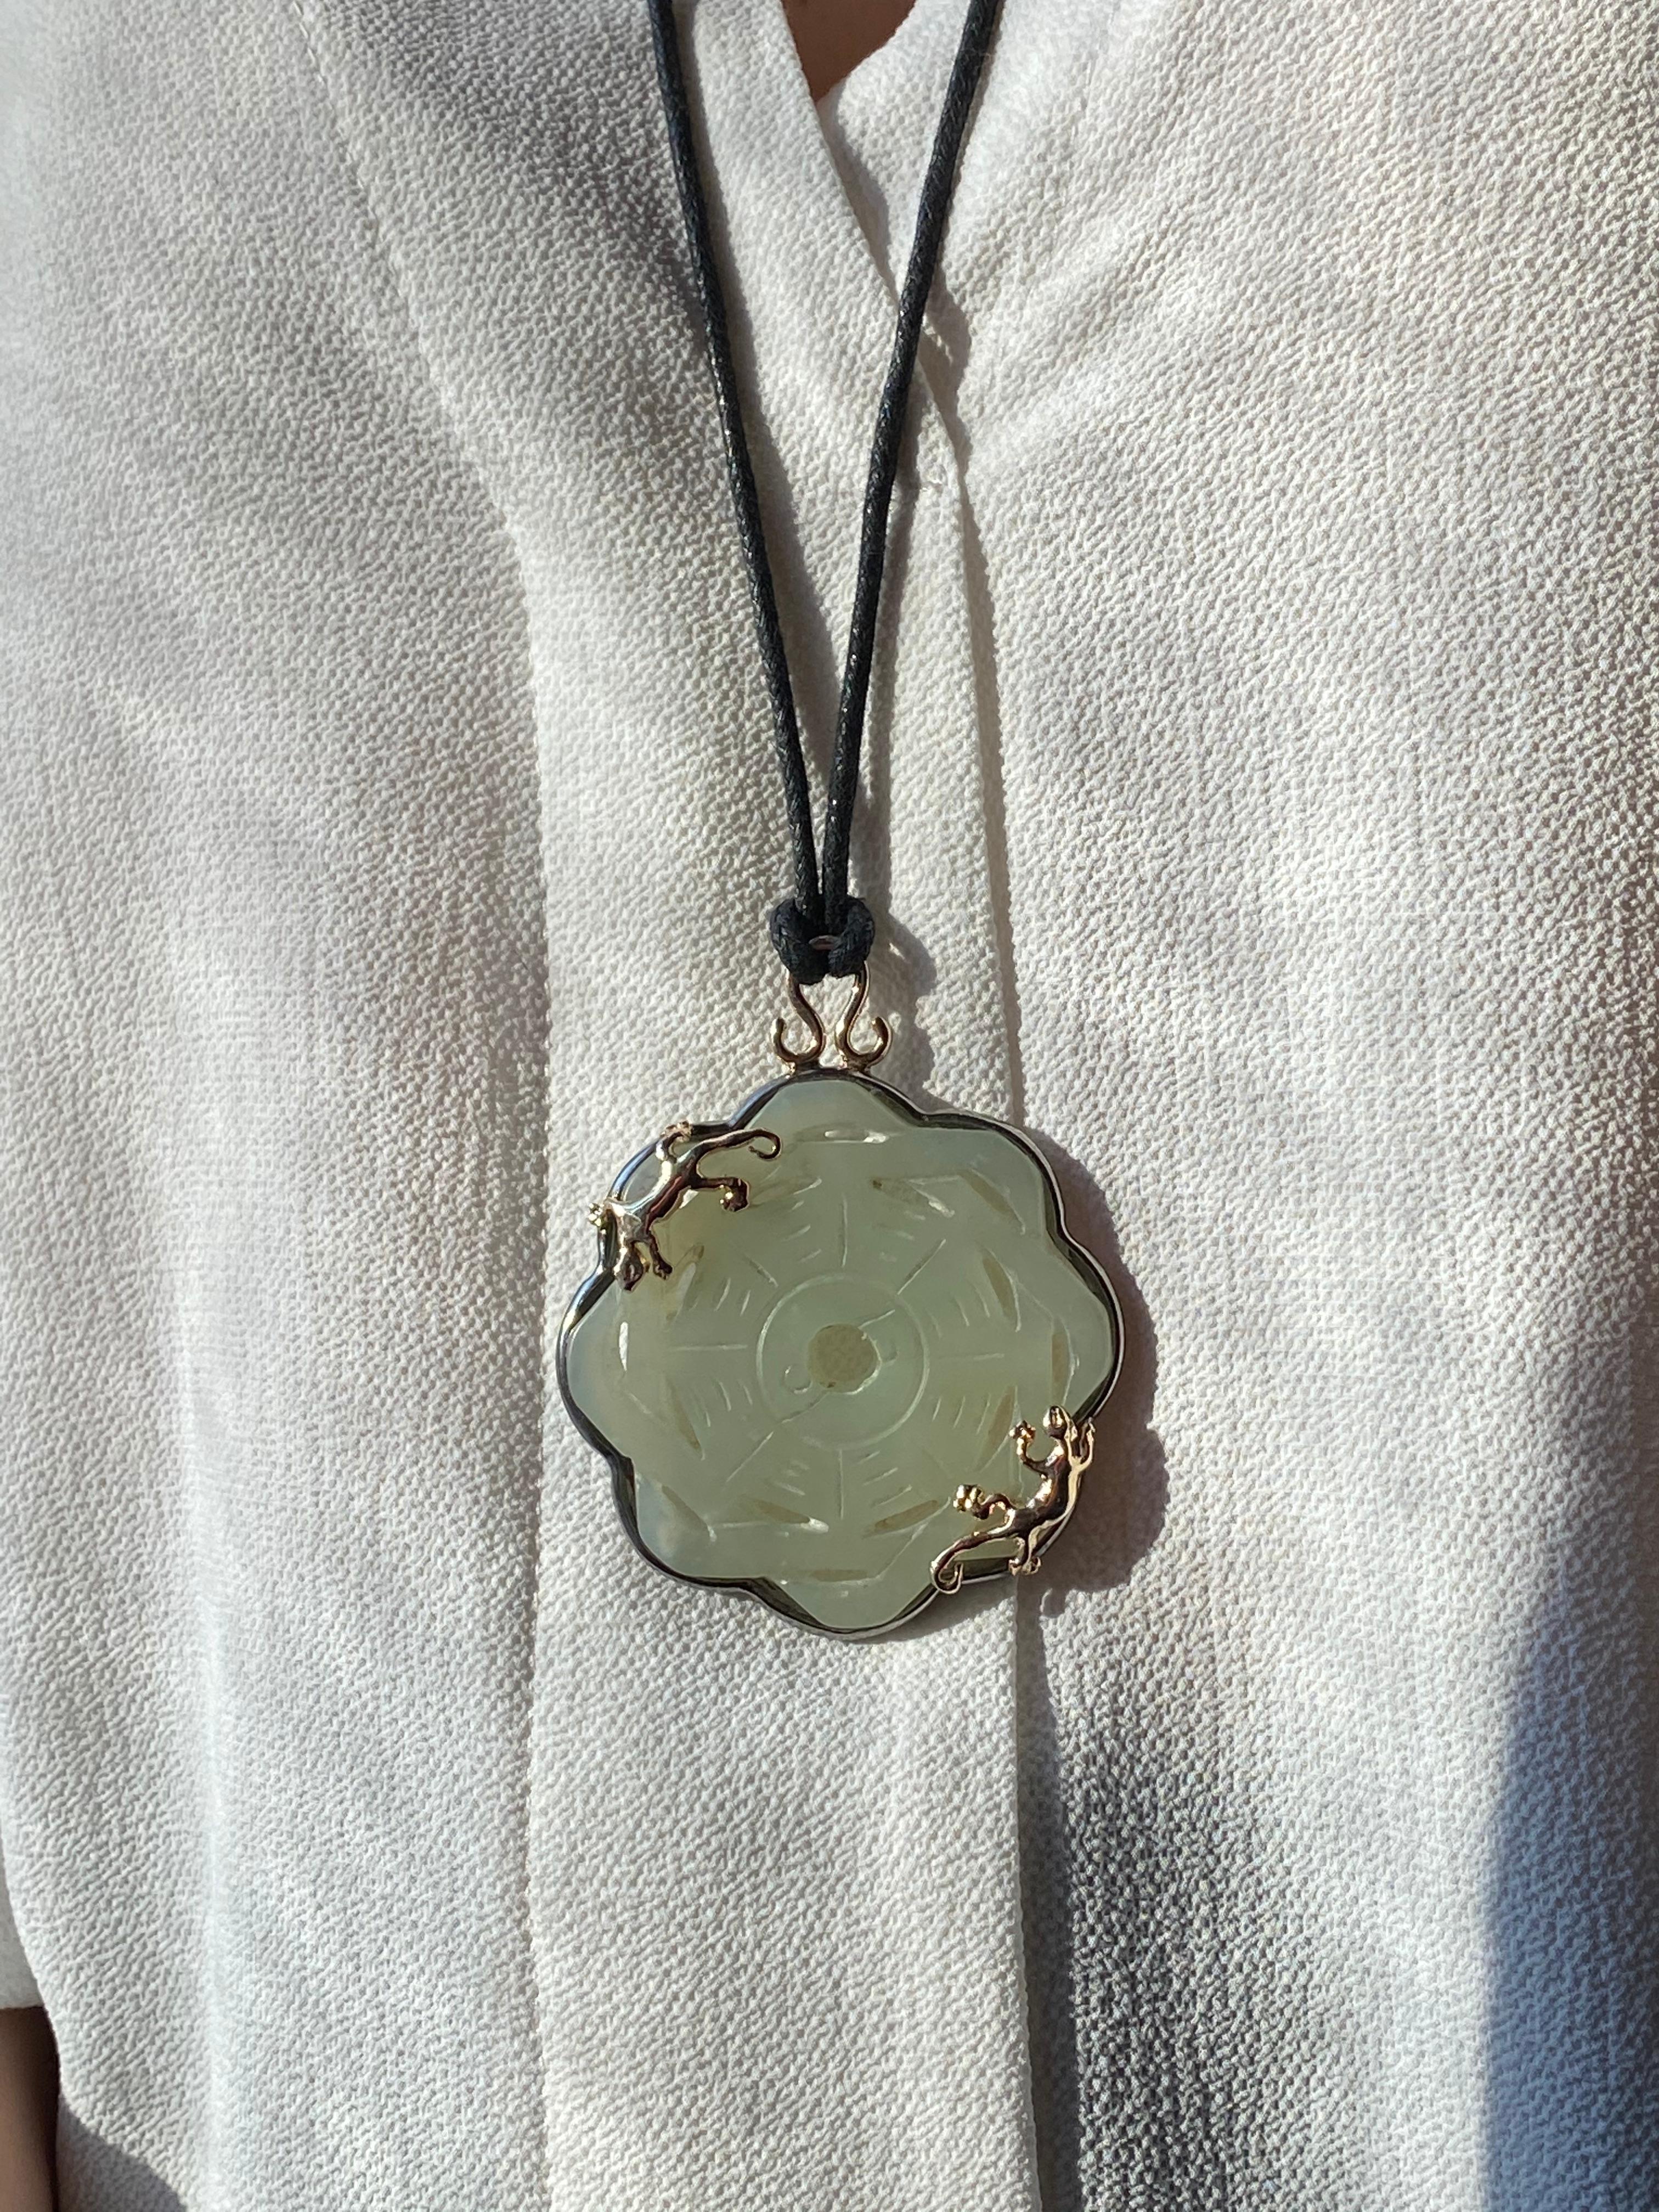 Rossella Ugolini Design Collection One-of-a Kind Carved Green Jade Handcrafted in 24K Yellow Gold-Plated Silver Sterling and decorated with two dynamic and Lucky Geckos. The Jade Necklace pendant is suspended with a waxed Black Silk string.  The